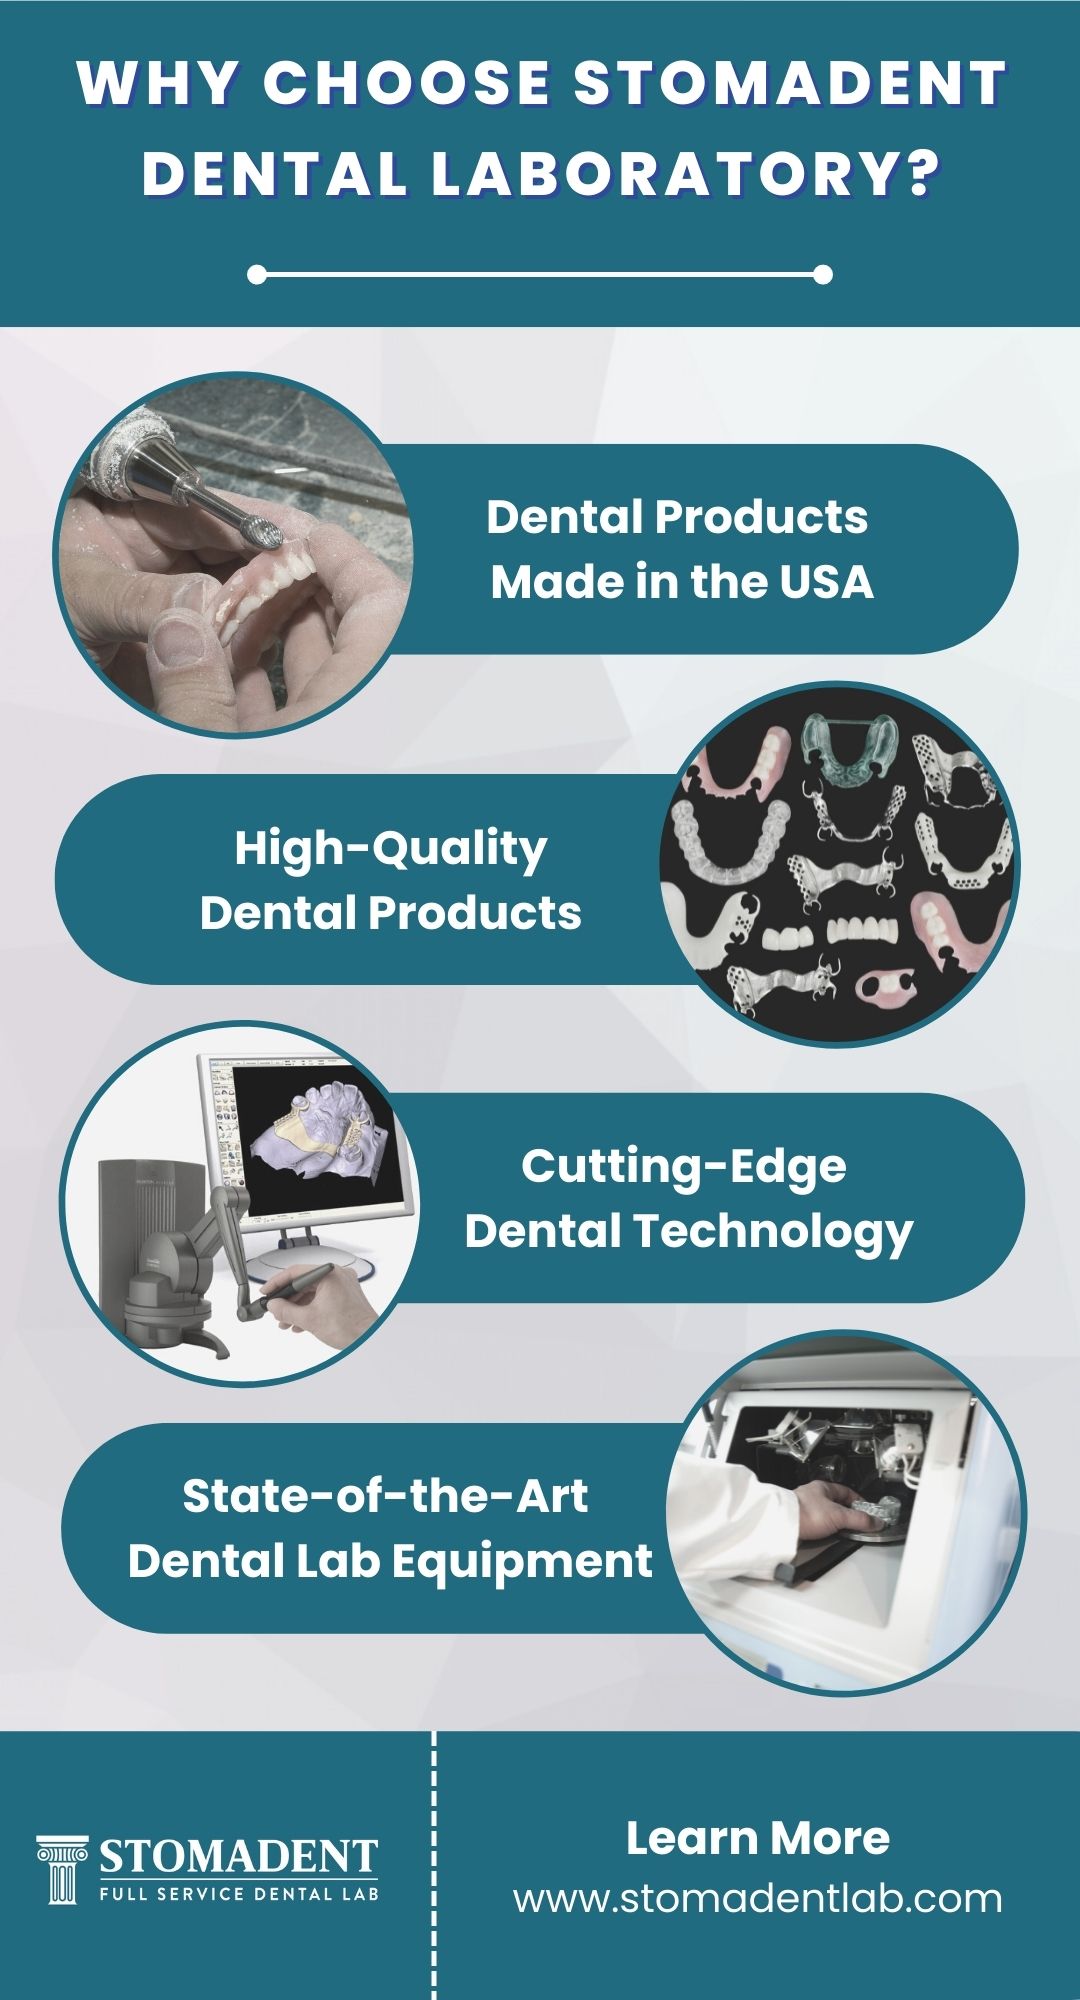 Why Choose Stomadent Dental Laboratory?